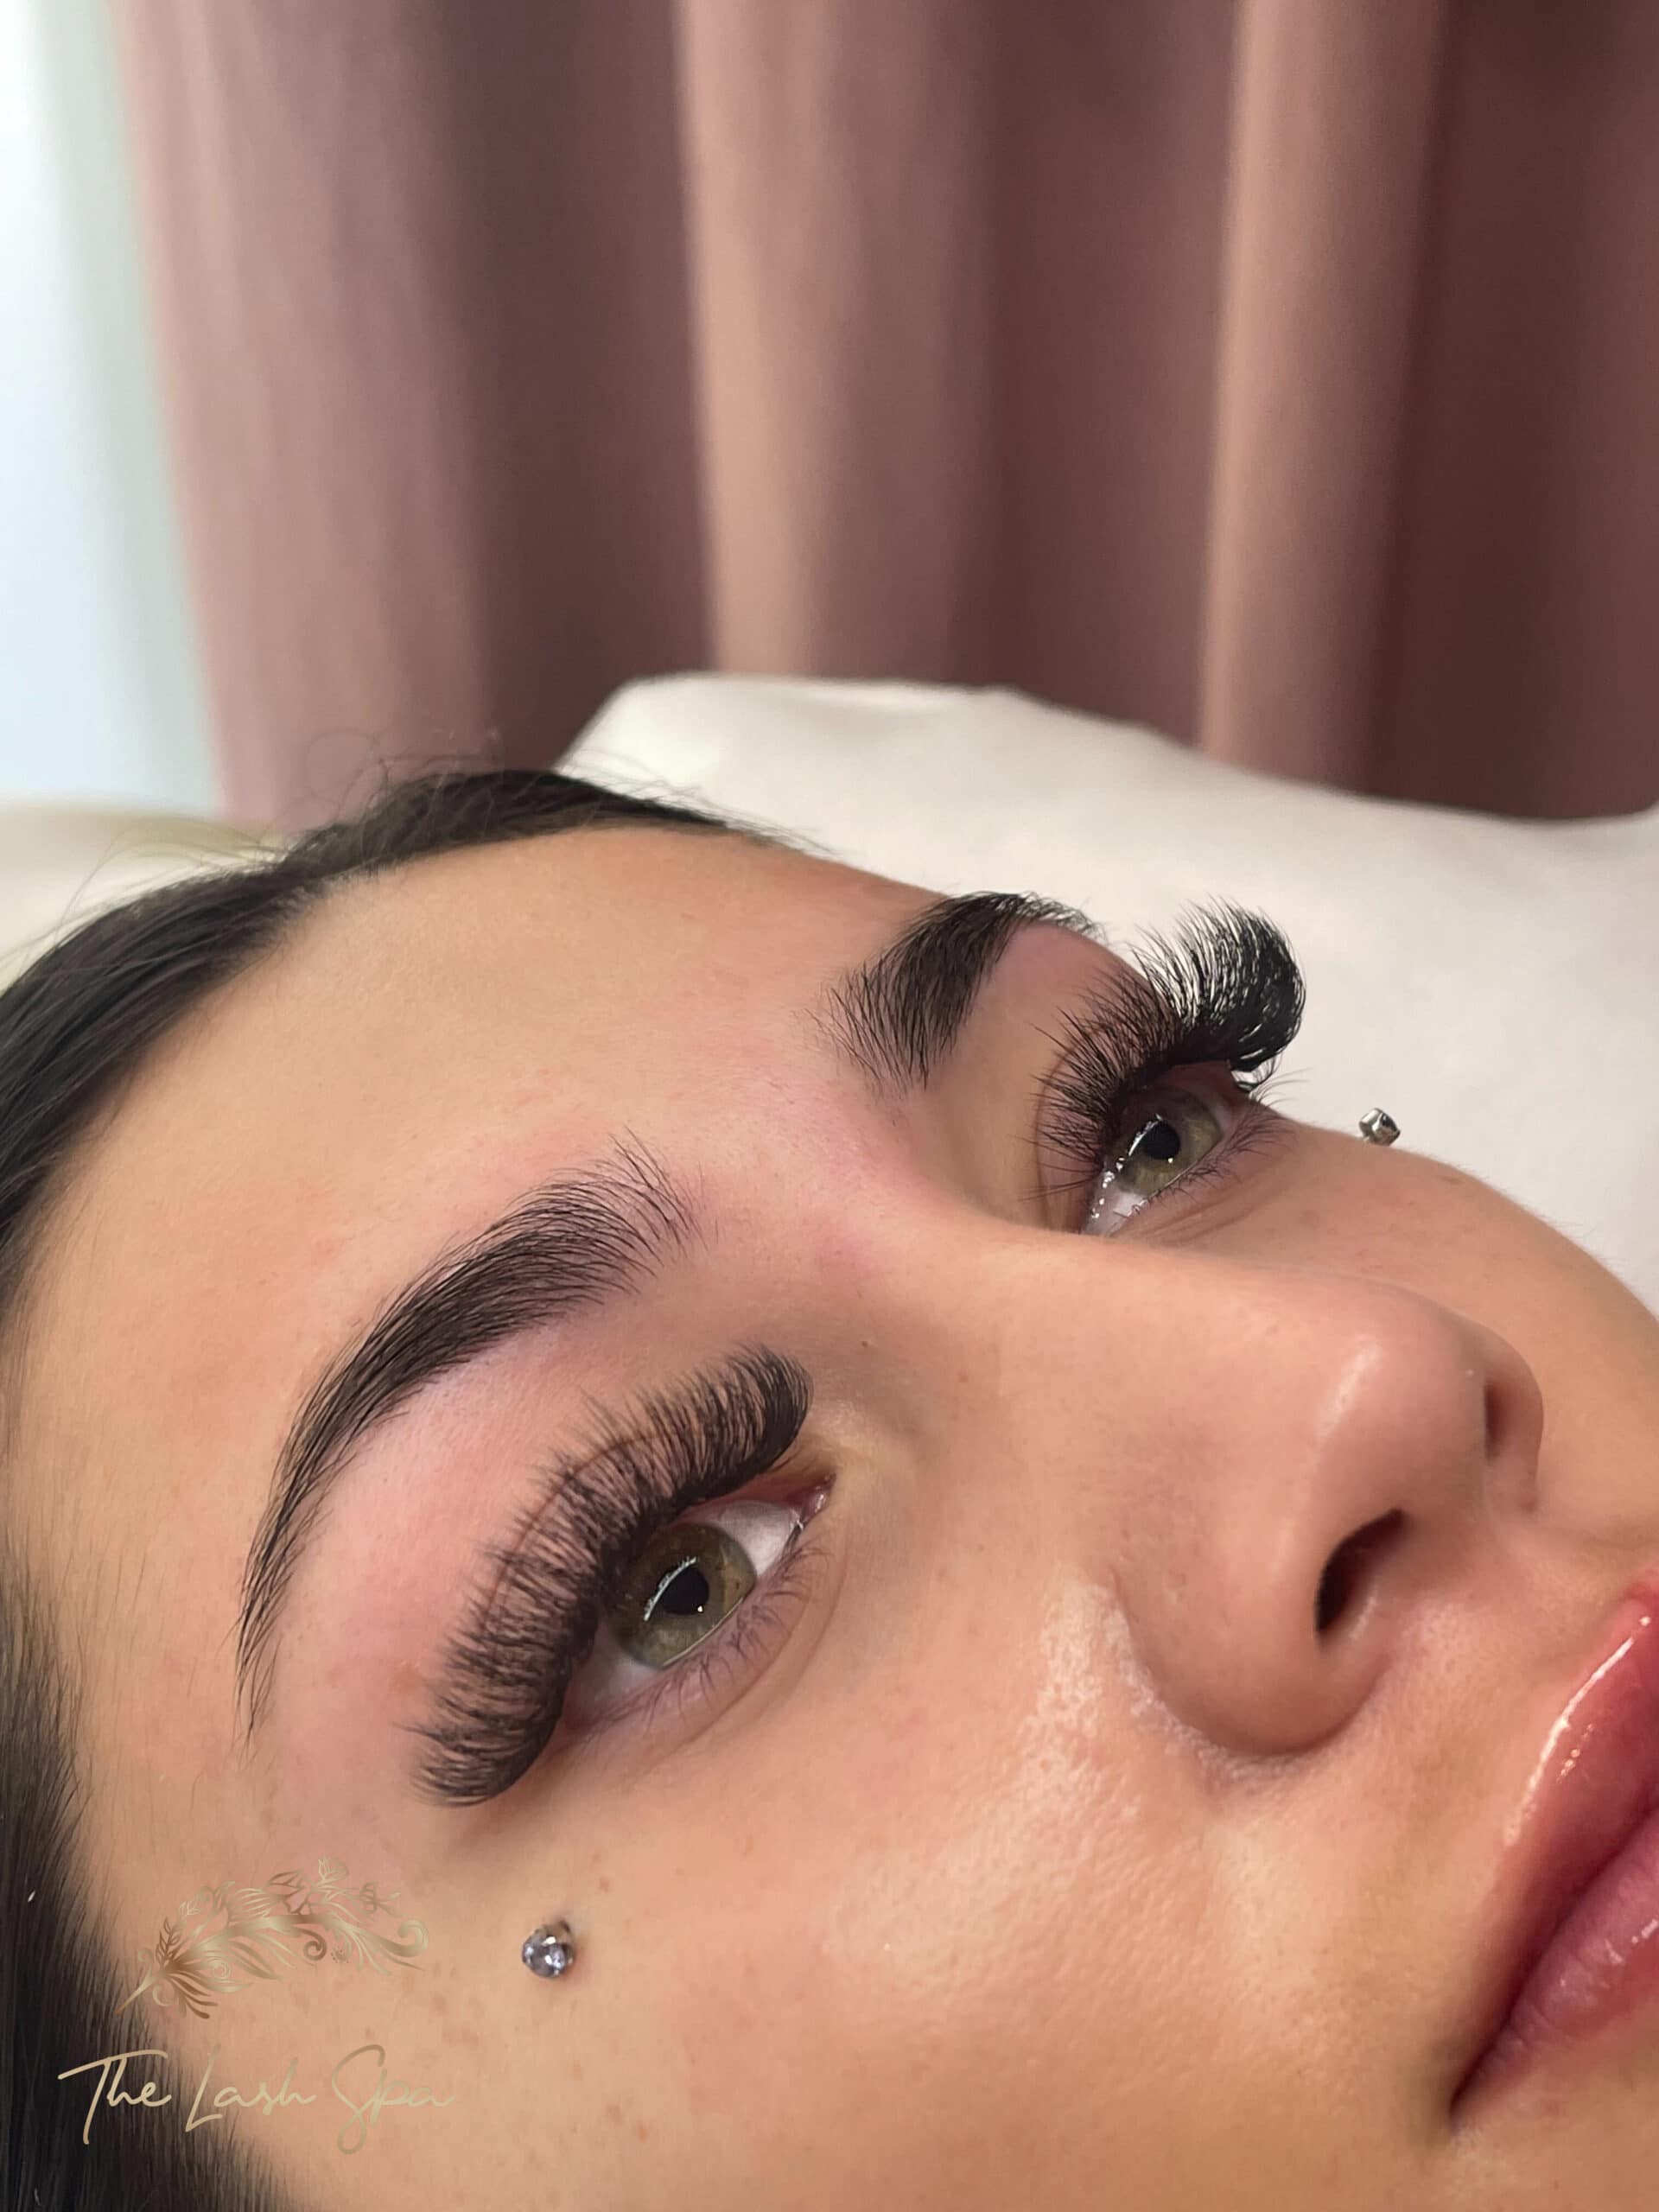 Lash lift or extensions